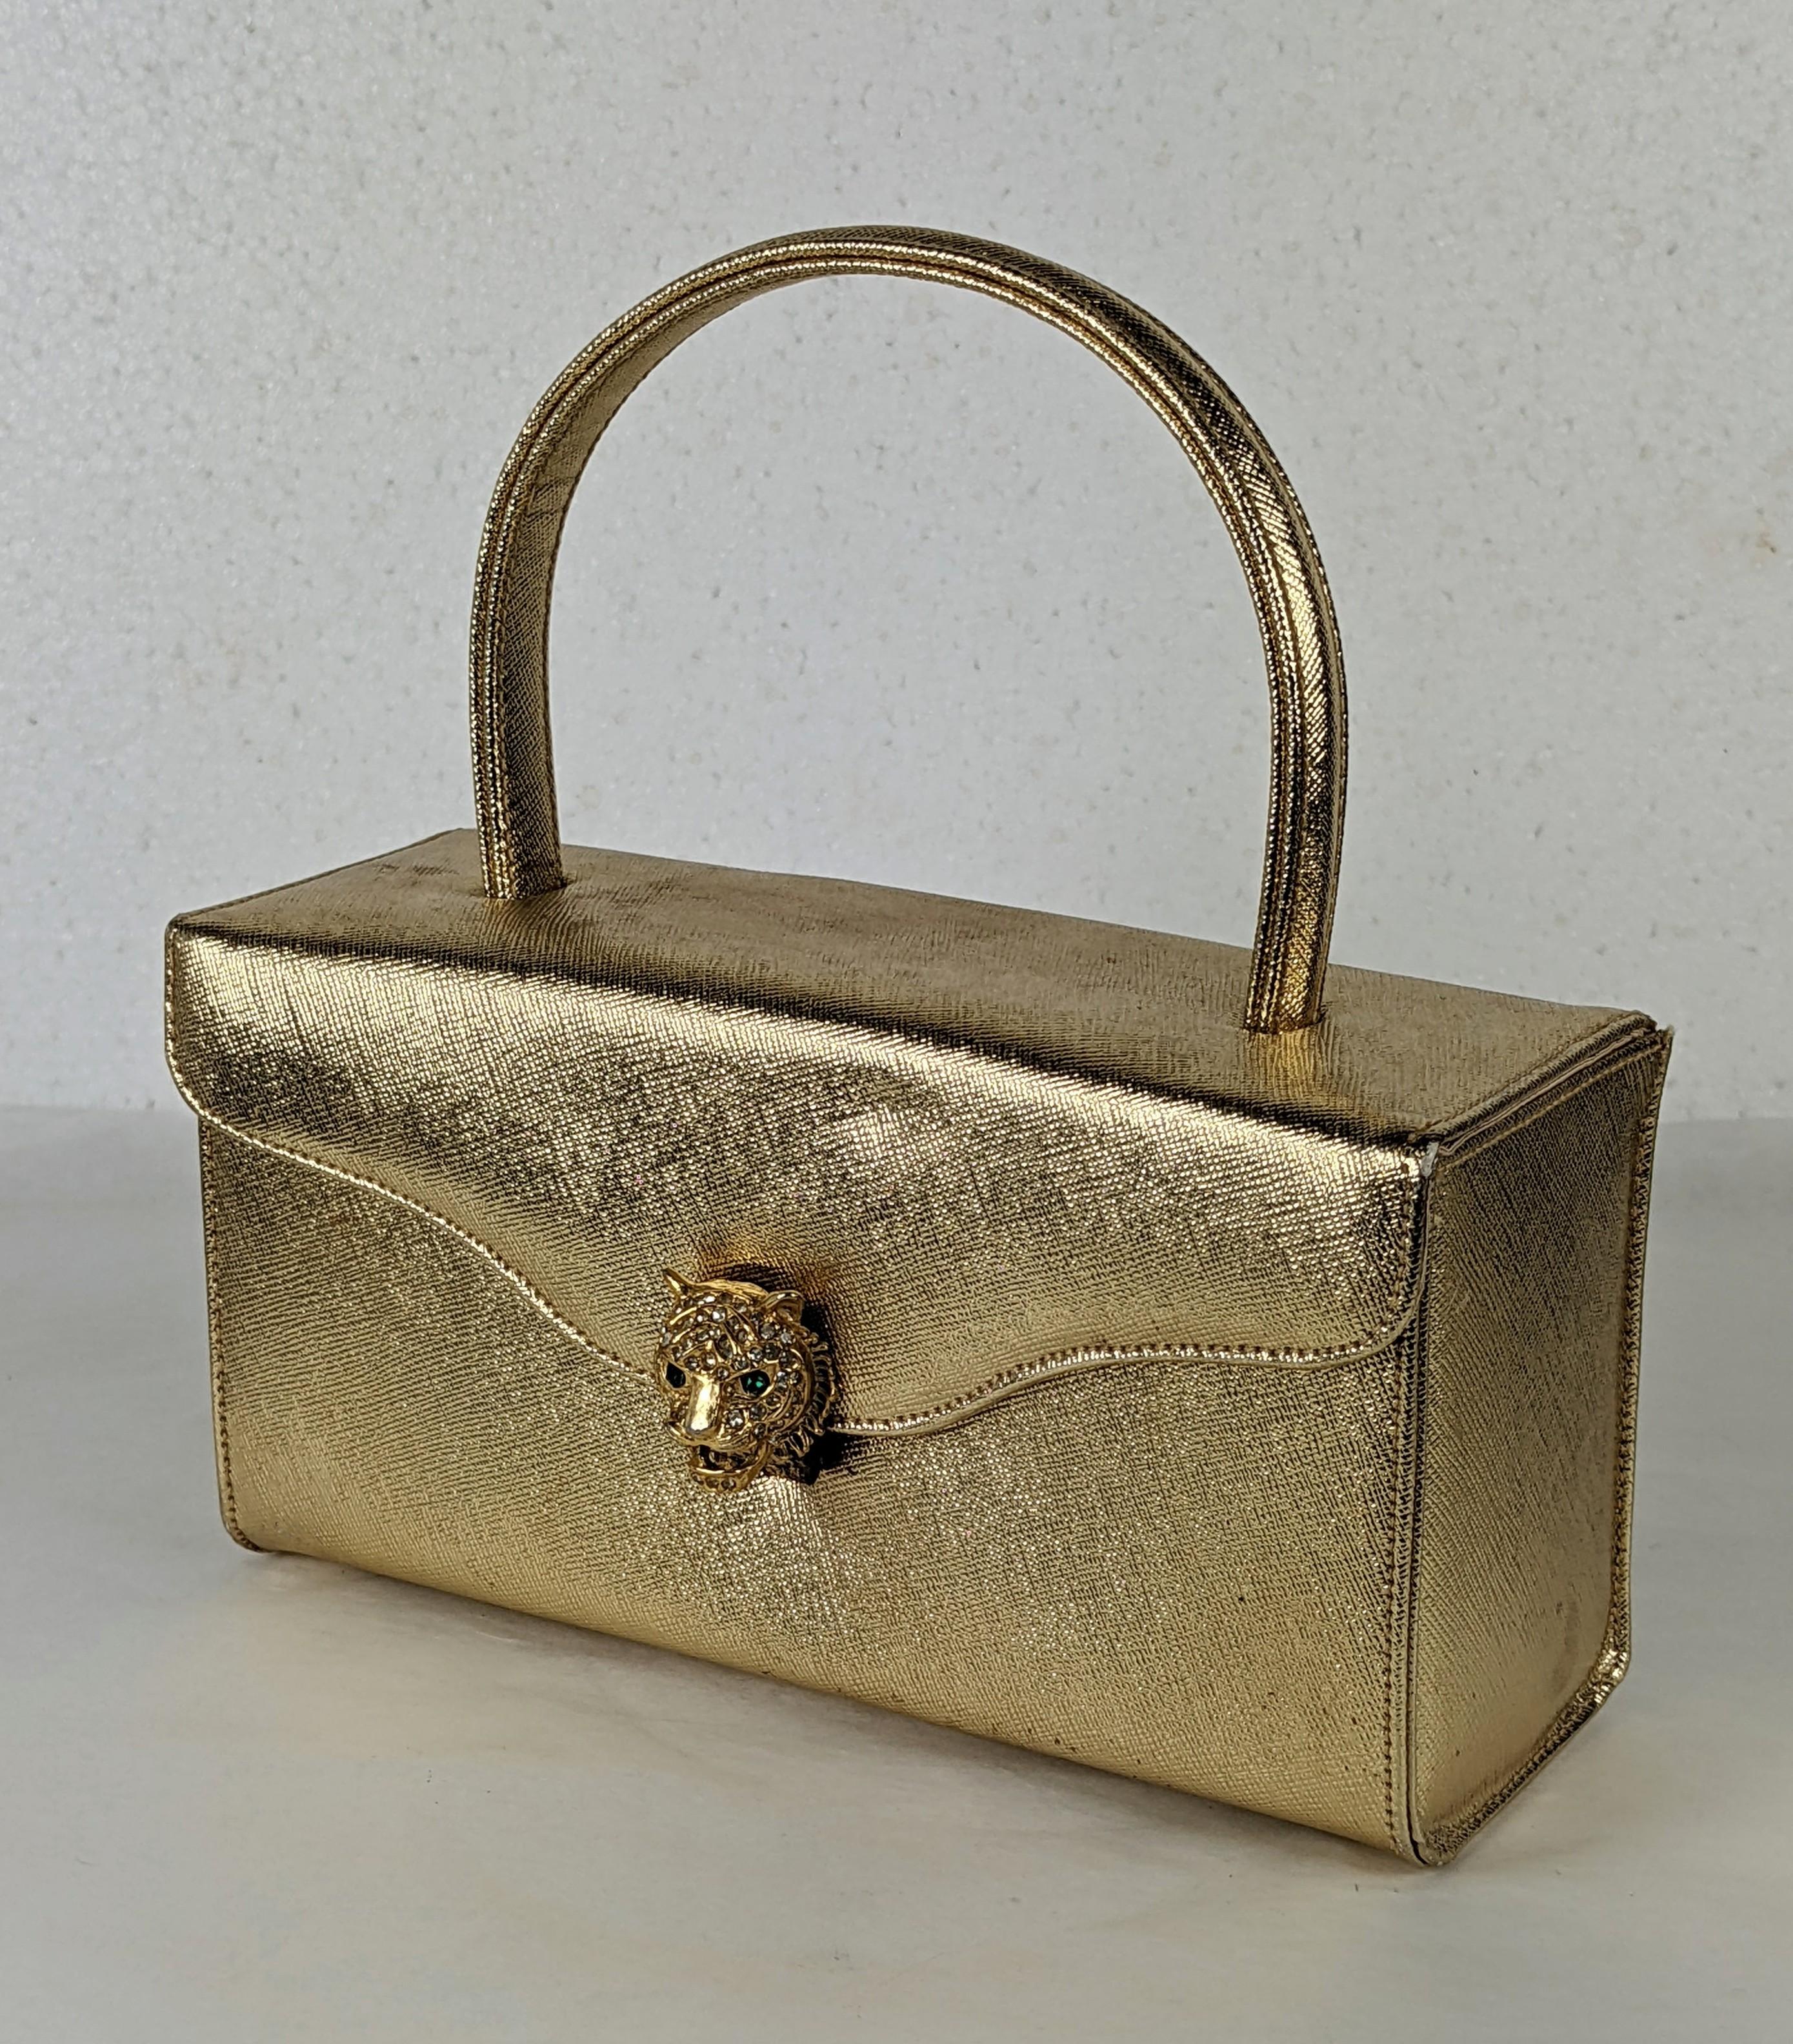 Charming top Handled Gold Leatherette Box Bag with pave and enamel tiger head clasp retailed at Saks Fifth Ave. in the 1960's. 